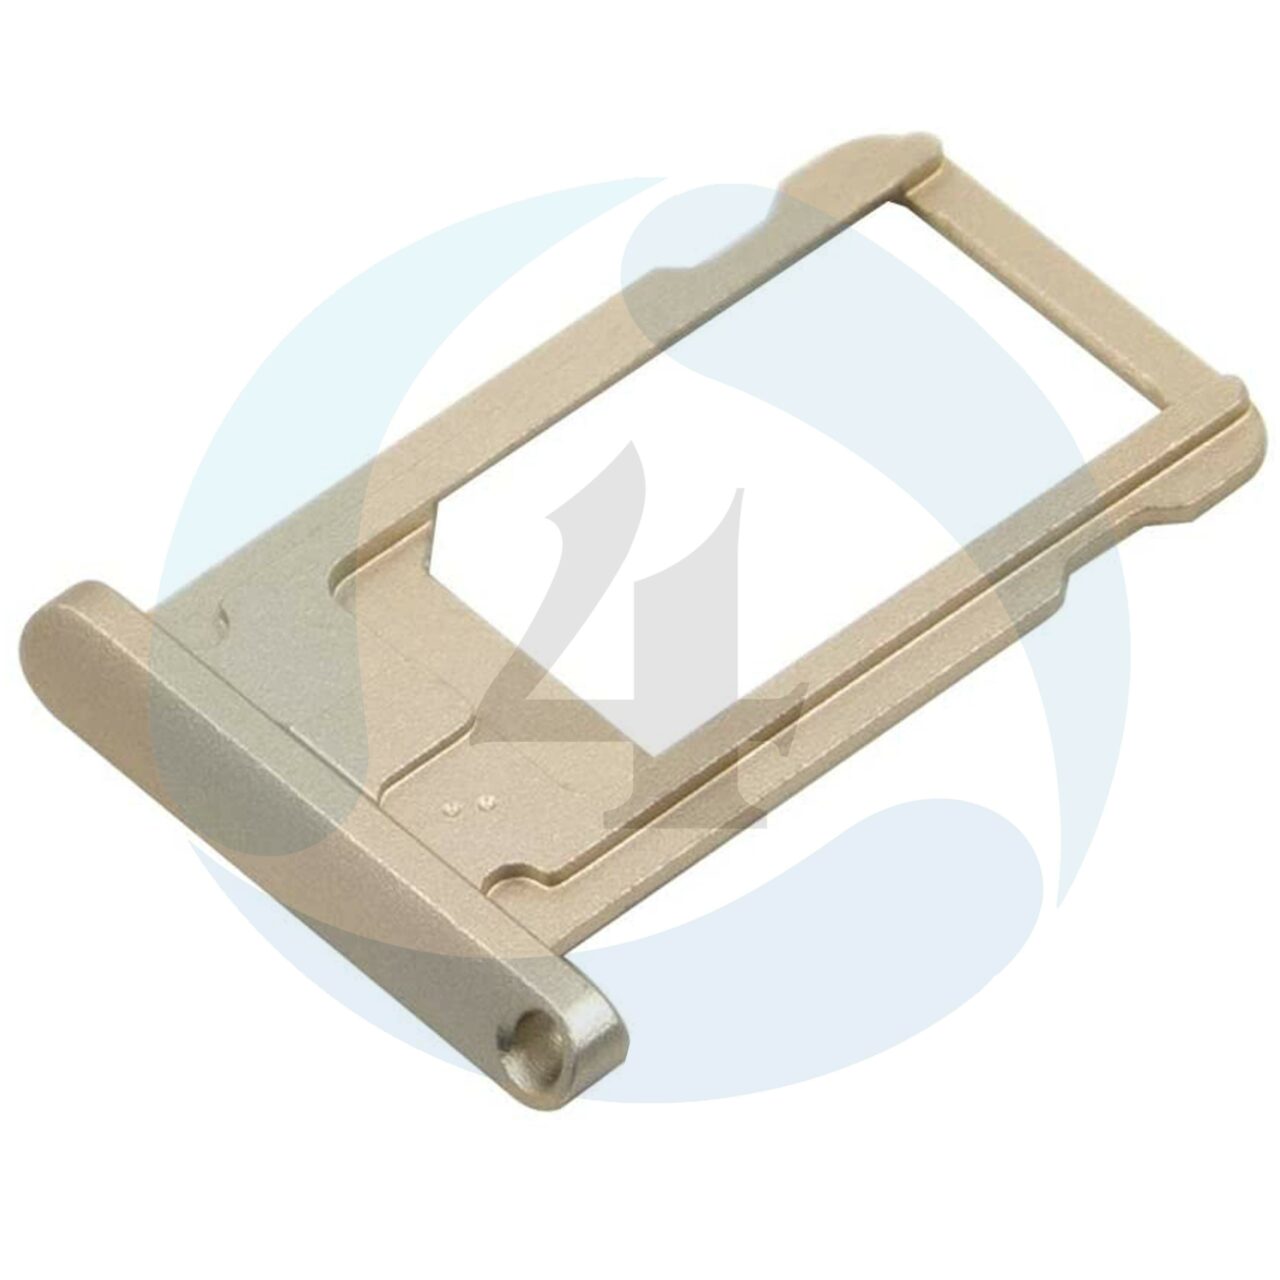 SIM Card Tray Replacement compatible with i Pad Air 2 9 7 inch i Pad Pro 12 9 inch 2015 gold